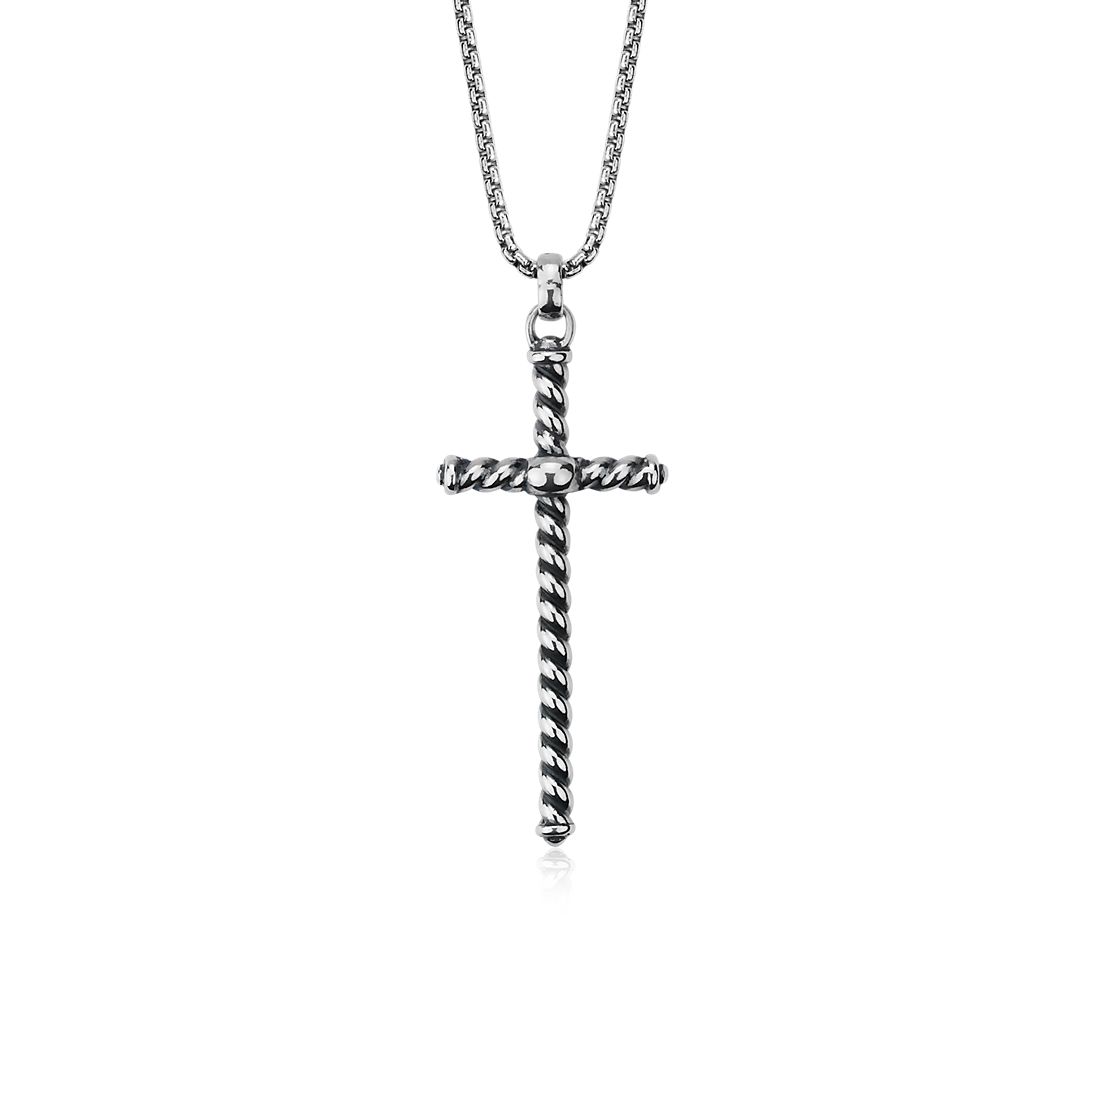 Box Sterling Silver Twisted Cross Pendant